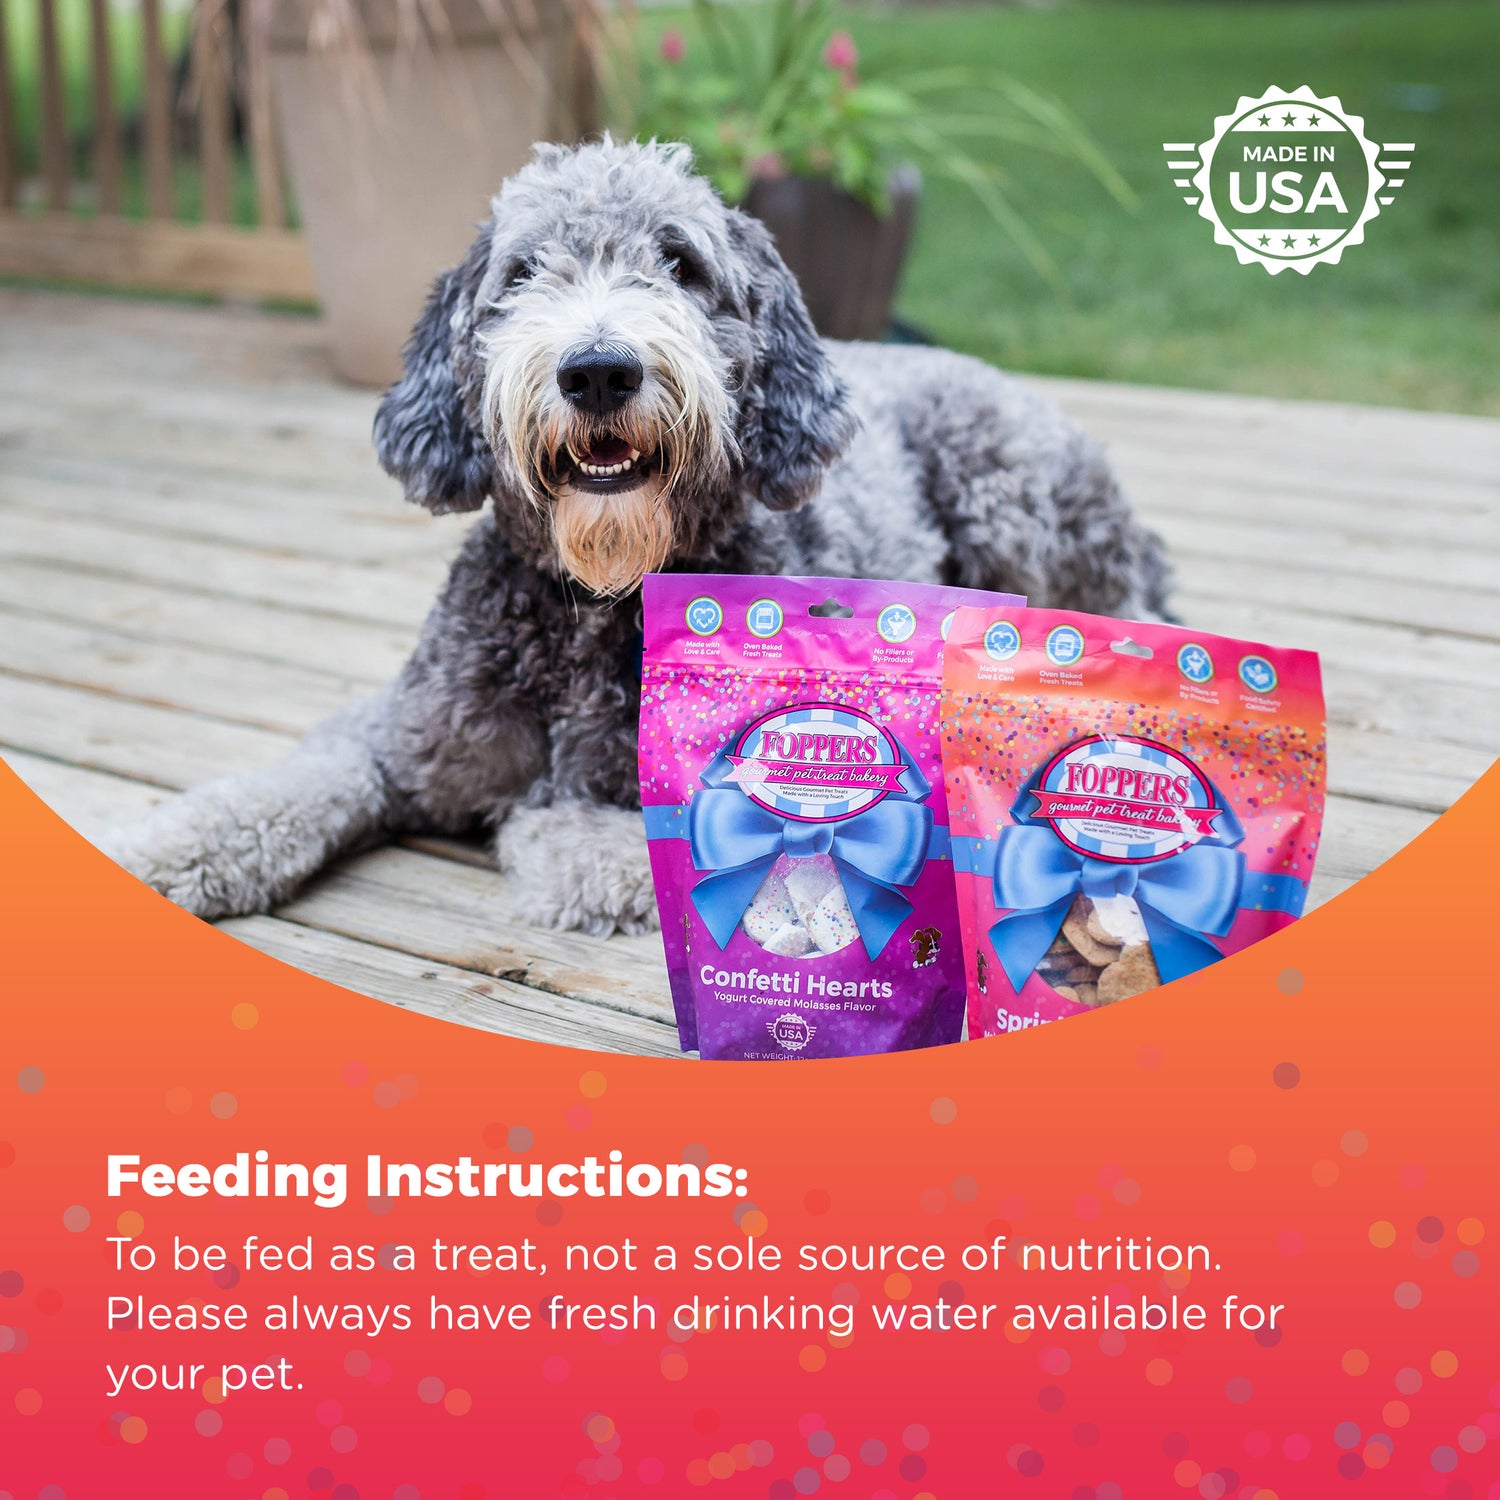 Feeding instructions: to be fed as a treat, not a sole source of nutrition. Please always have fresh drinking water available for your pet.